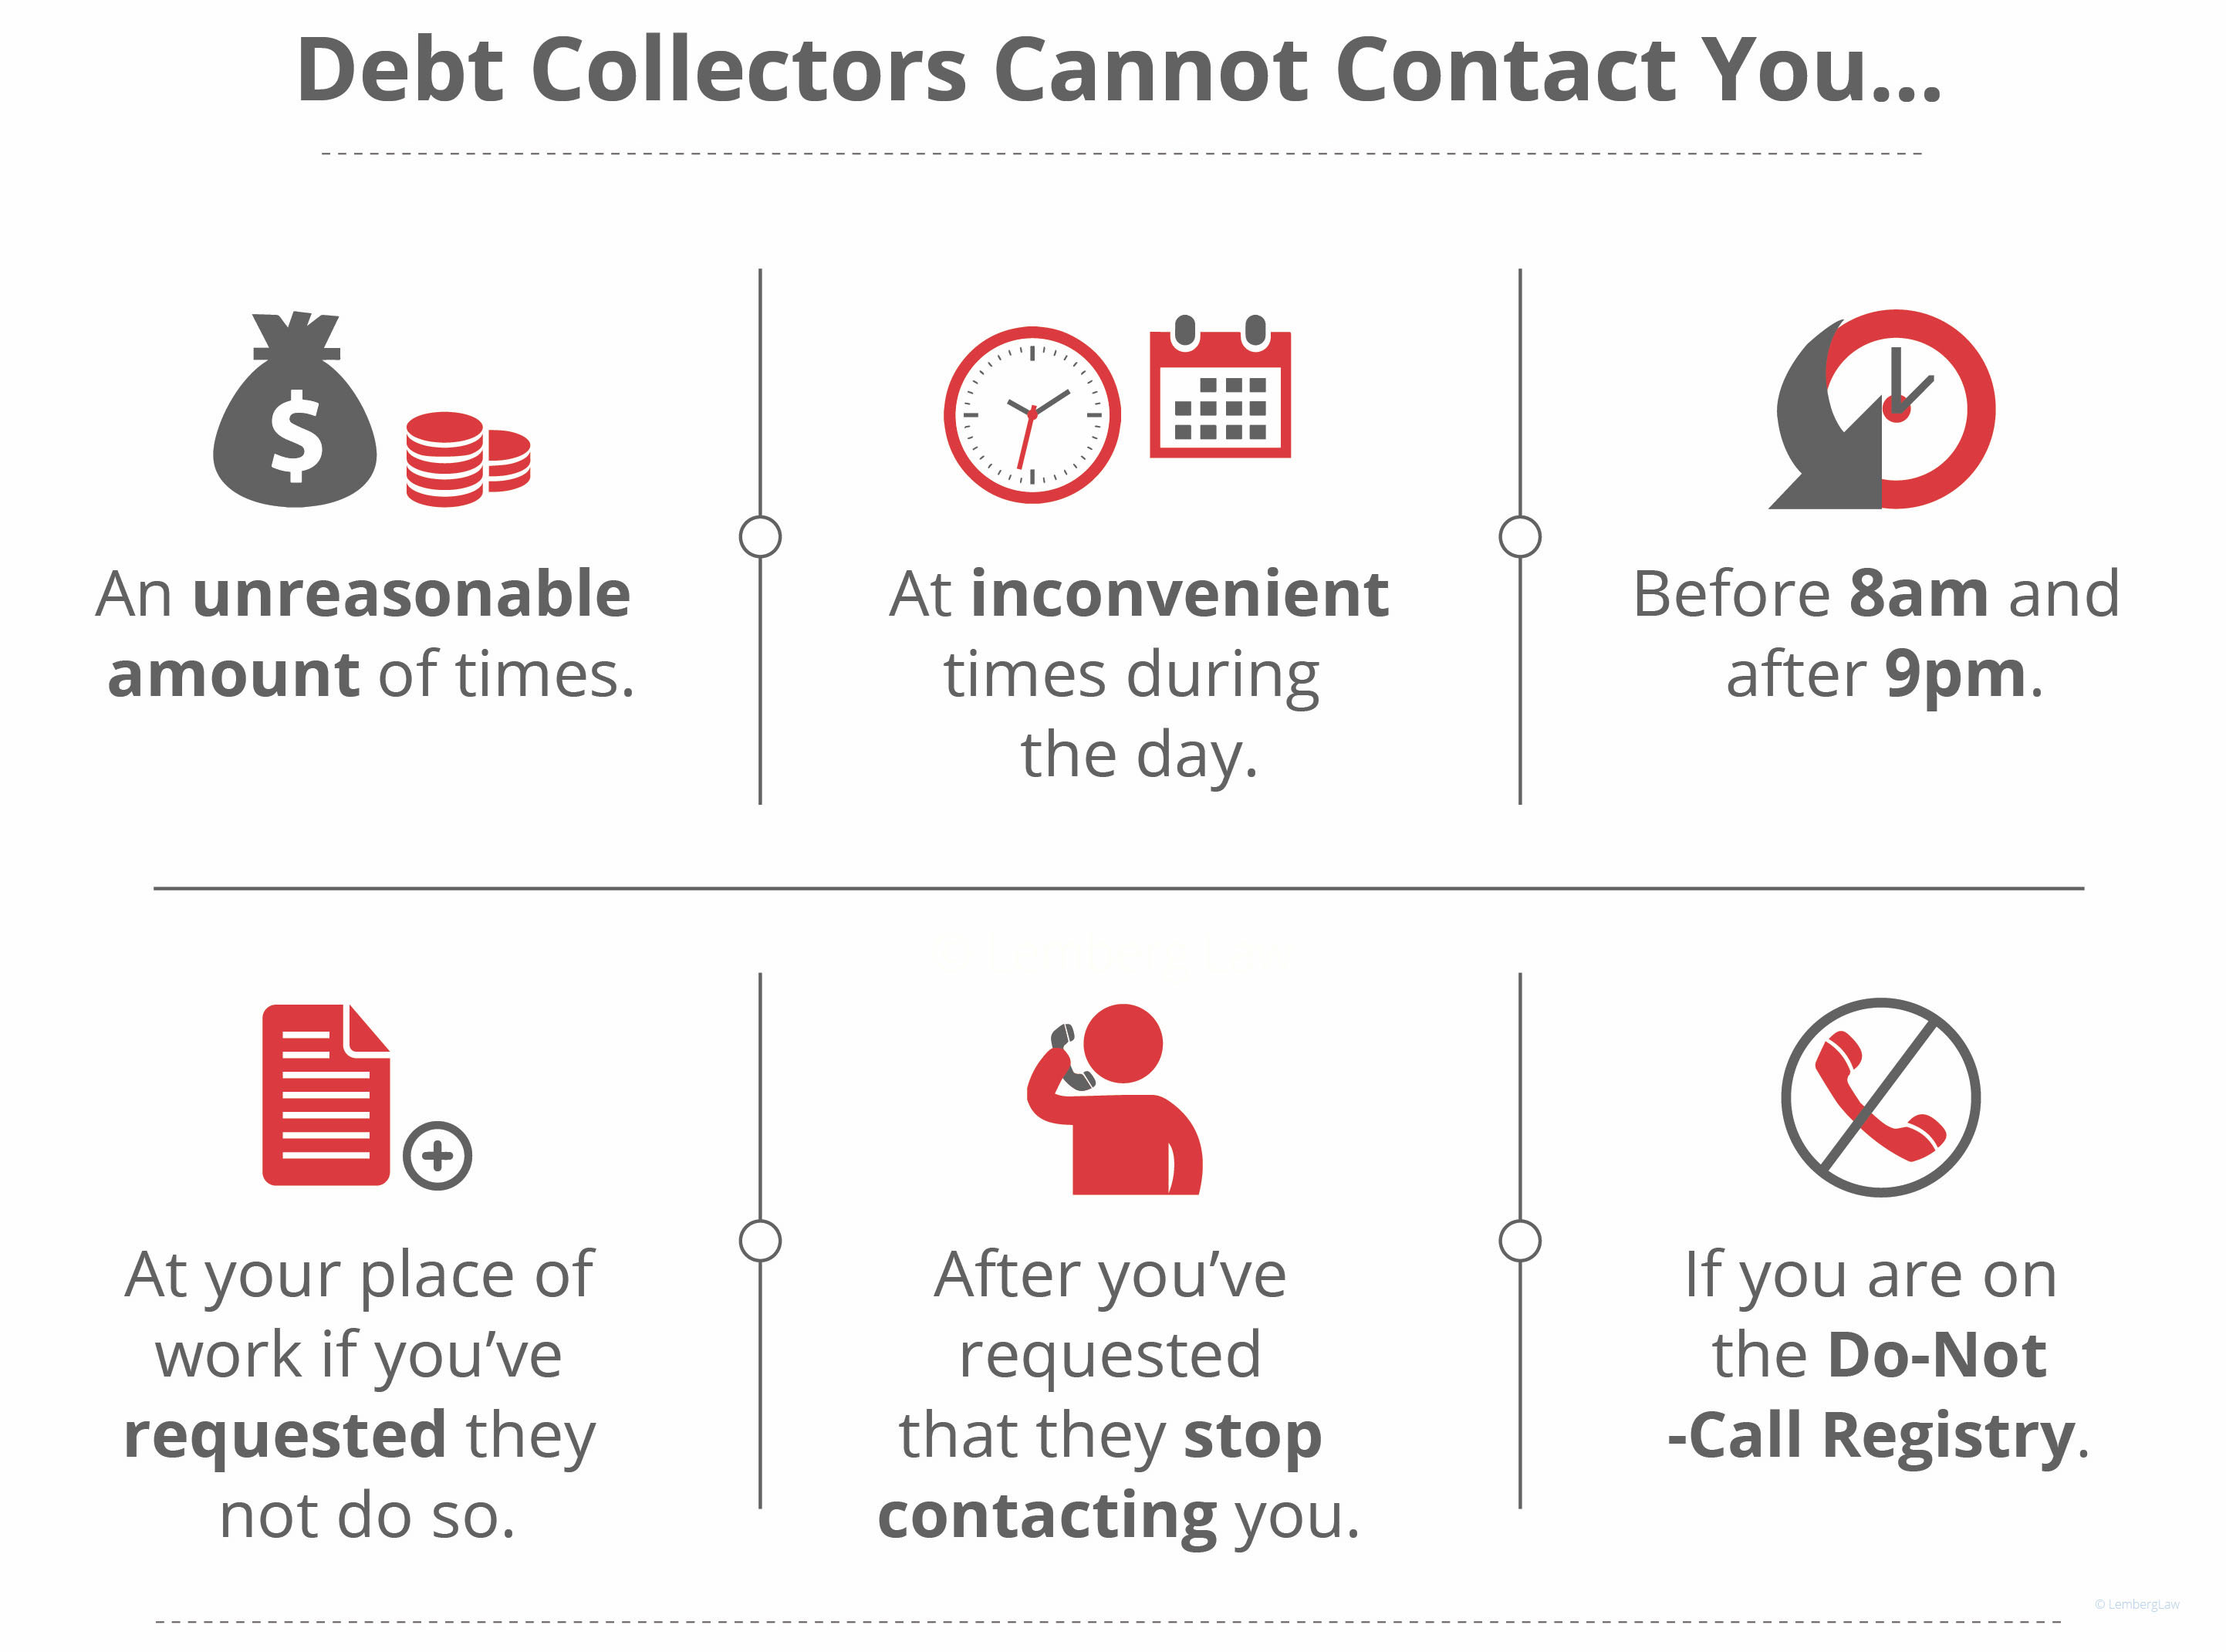 Personal Debt Collection